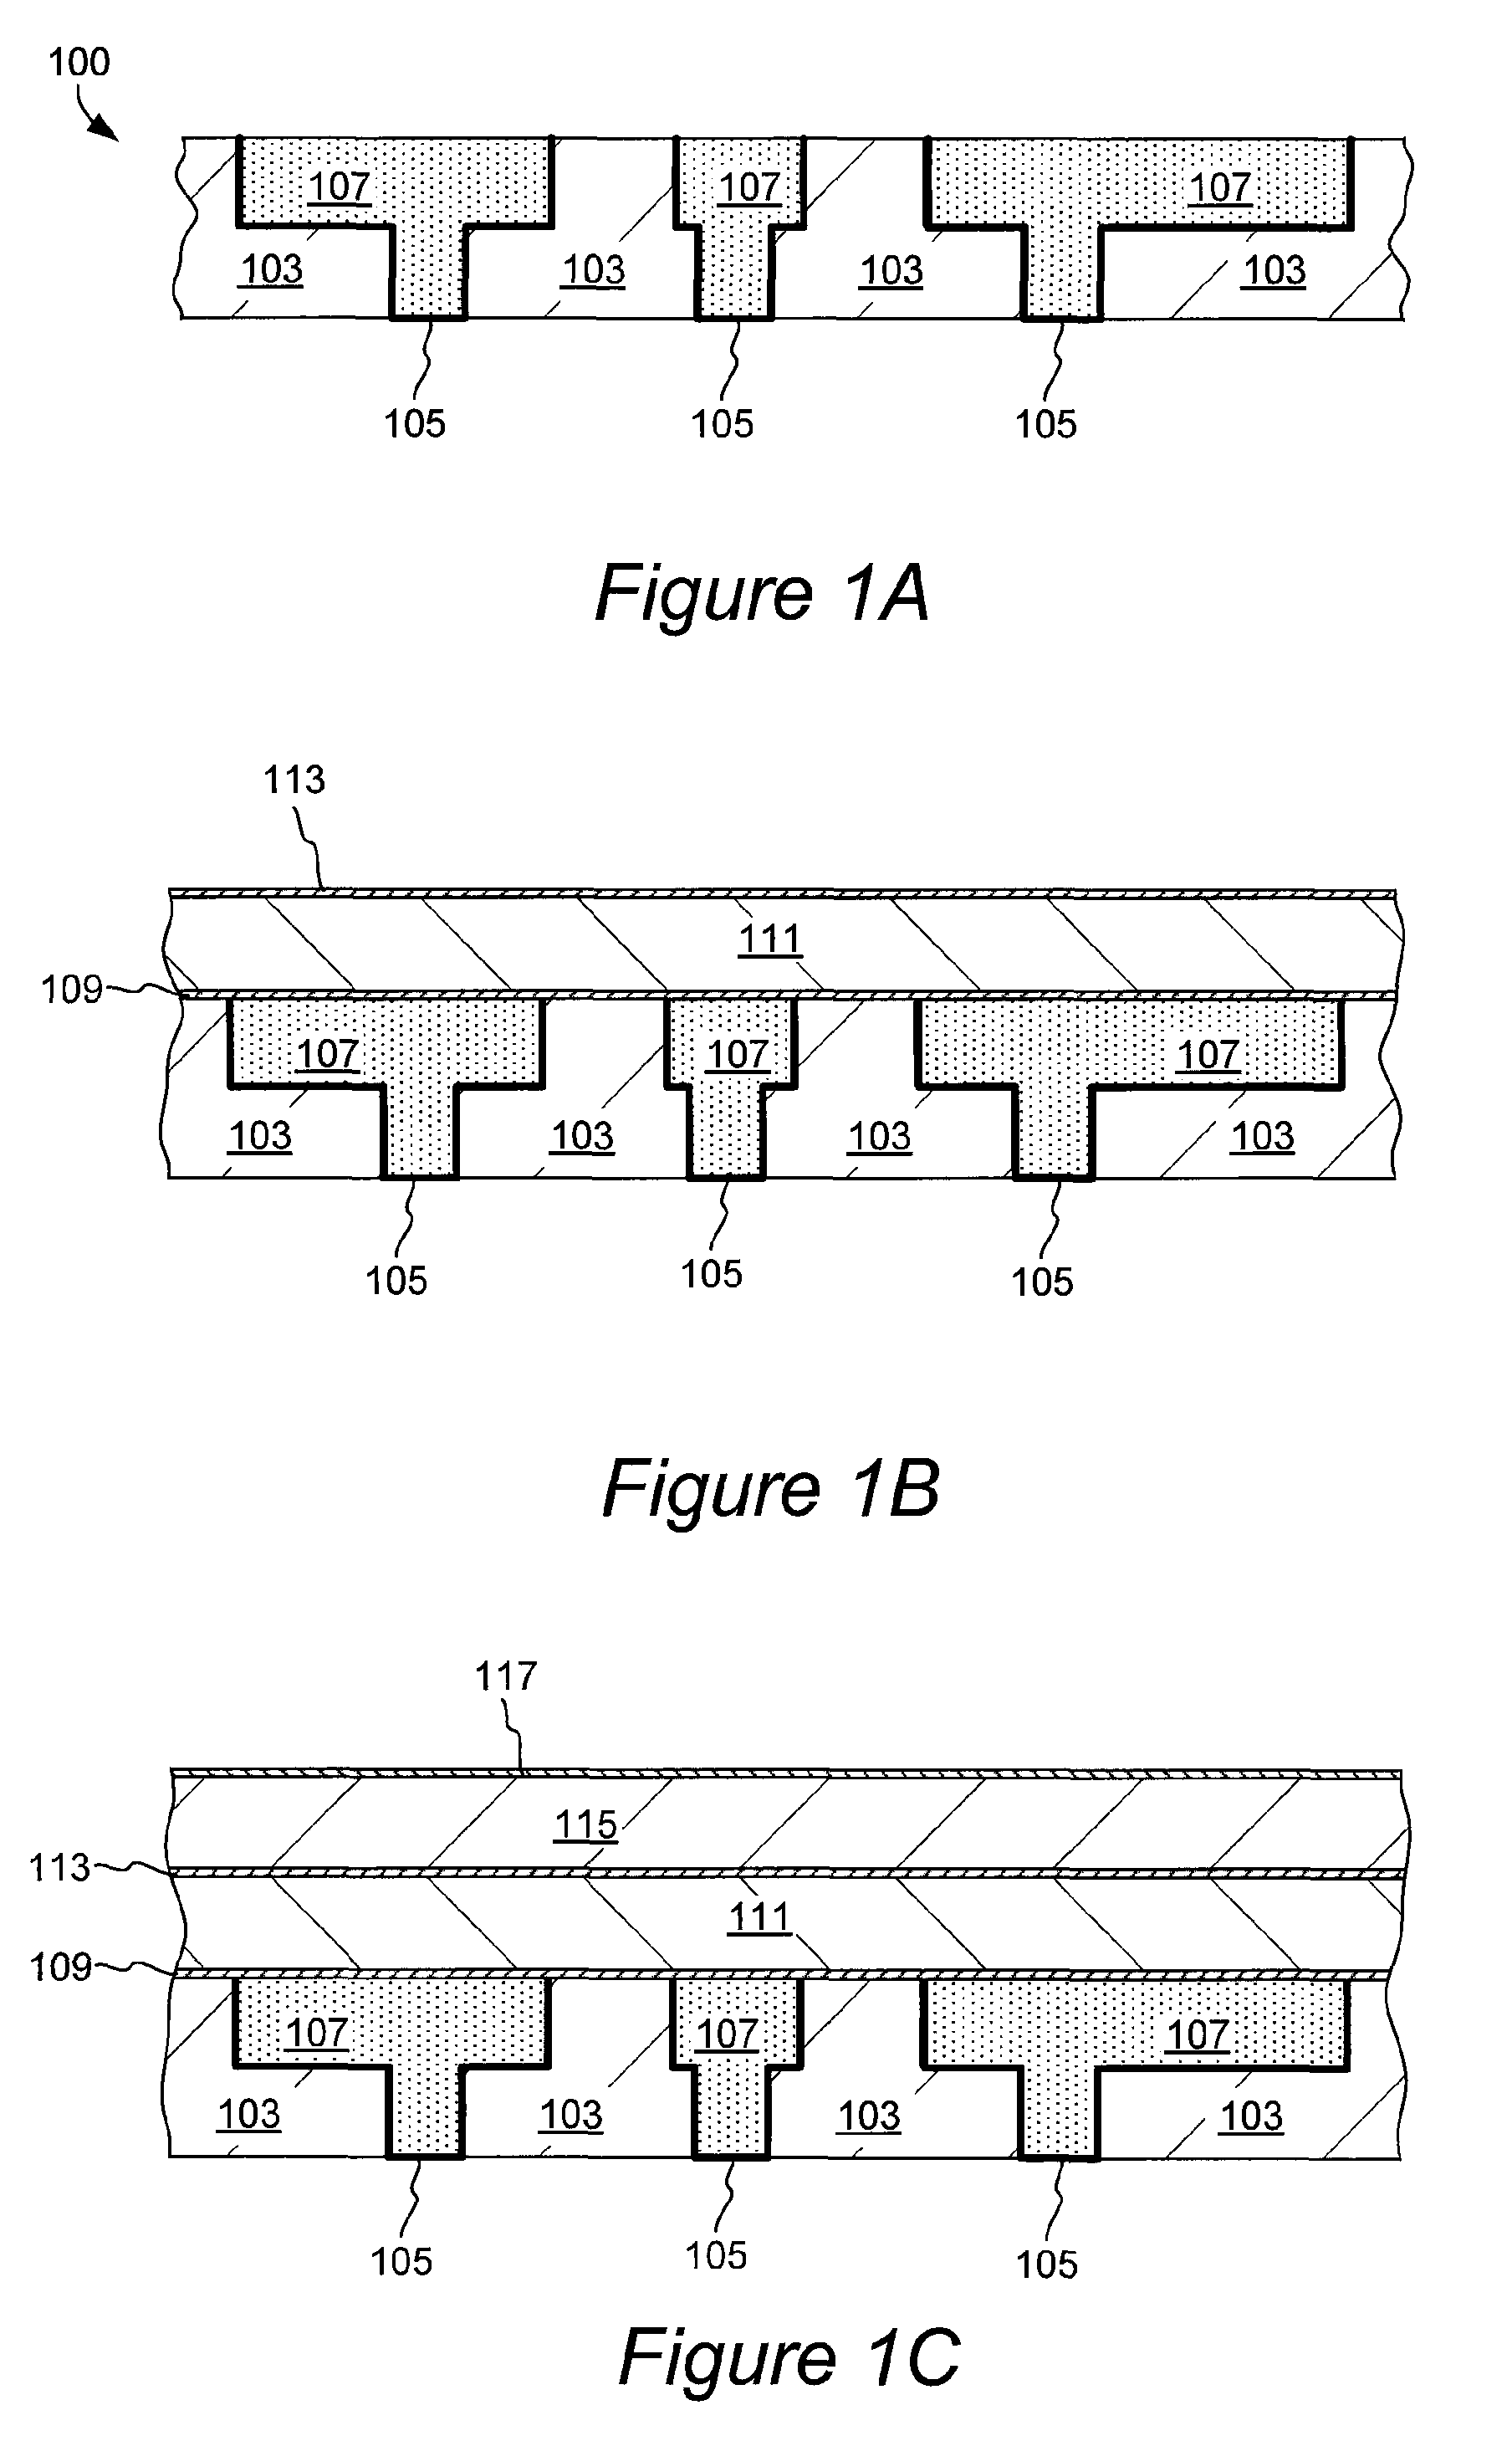 Method and apparatus for increasing local plasma density in magnetically confined plasma